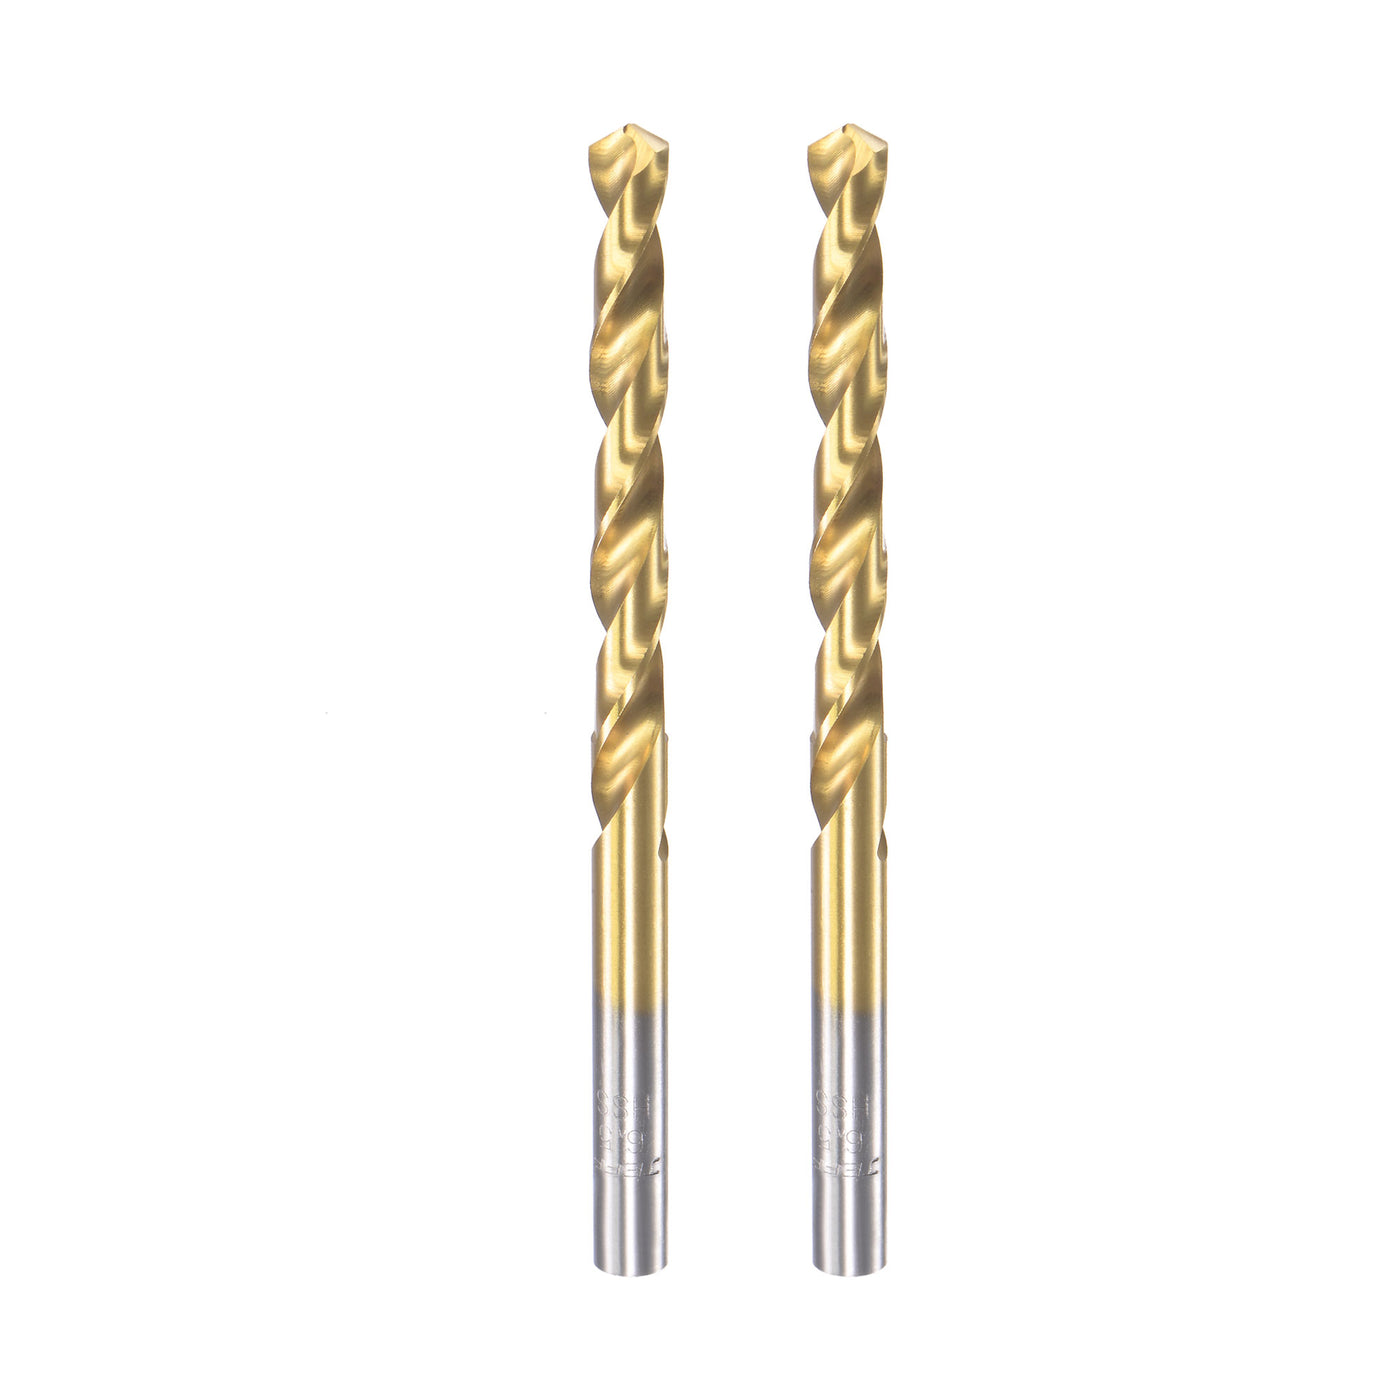 uxcell Uxcell High Speed Steel Twist Drill Bit 6.5mm Fully Ground Titanium Coated 2 Pcs